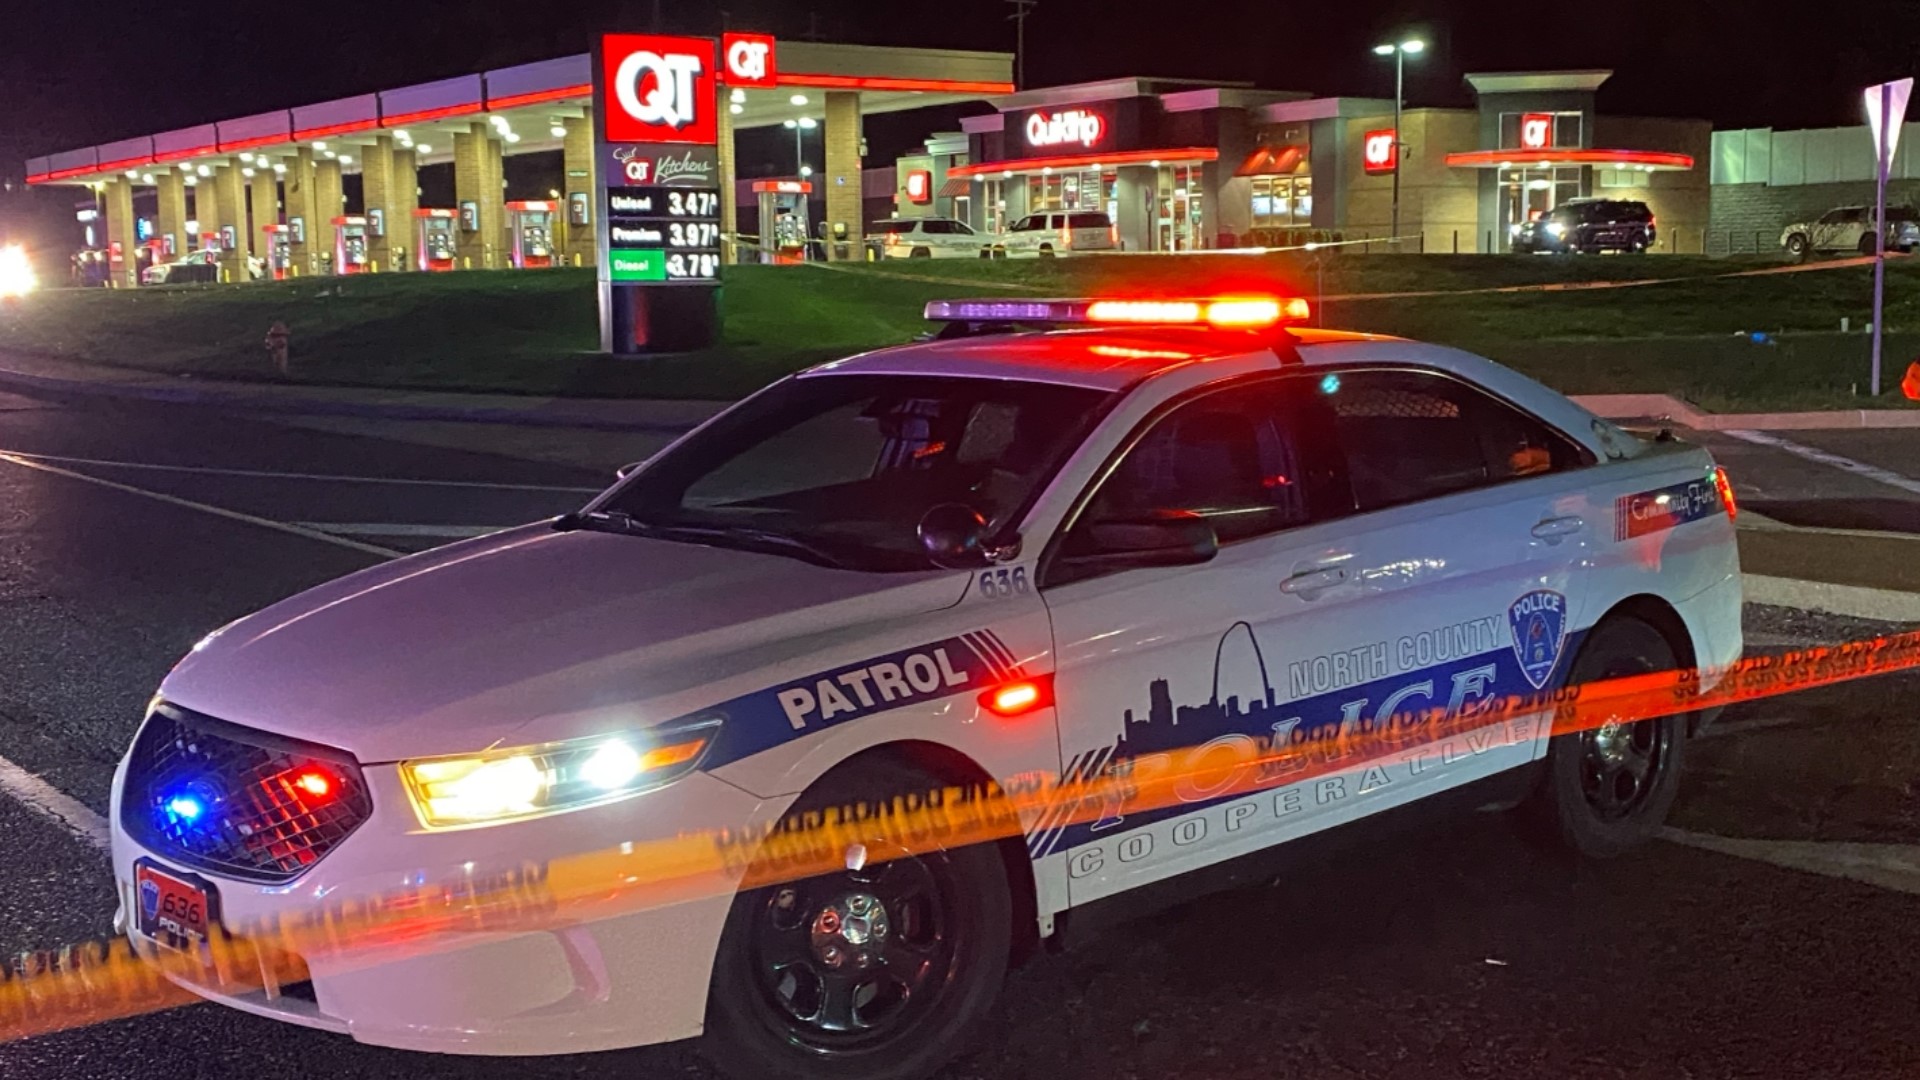 Hearing gunfire in the parking lot, the officer exited the gas station and witnessed a deadly shooting before firing at the suspect. The suspect was fatally wounded.